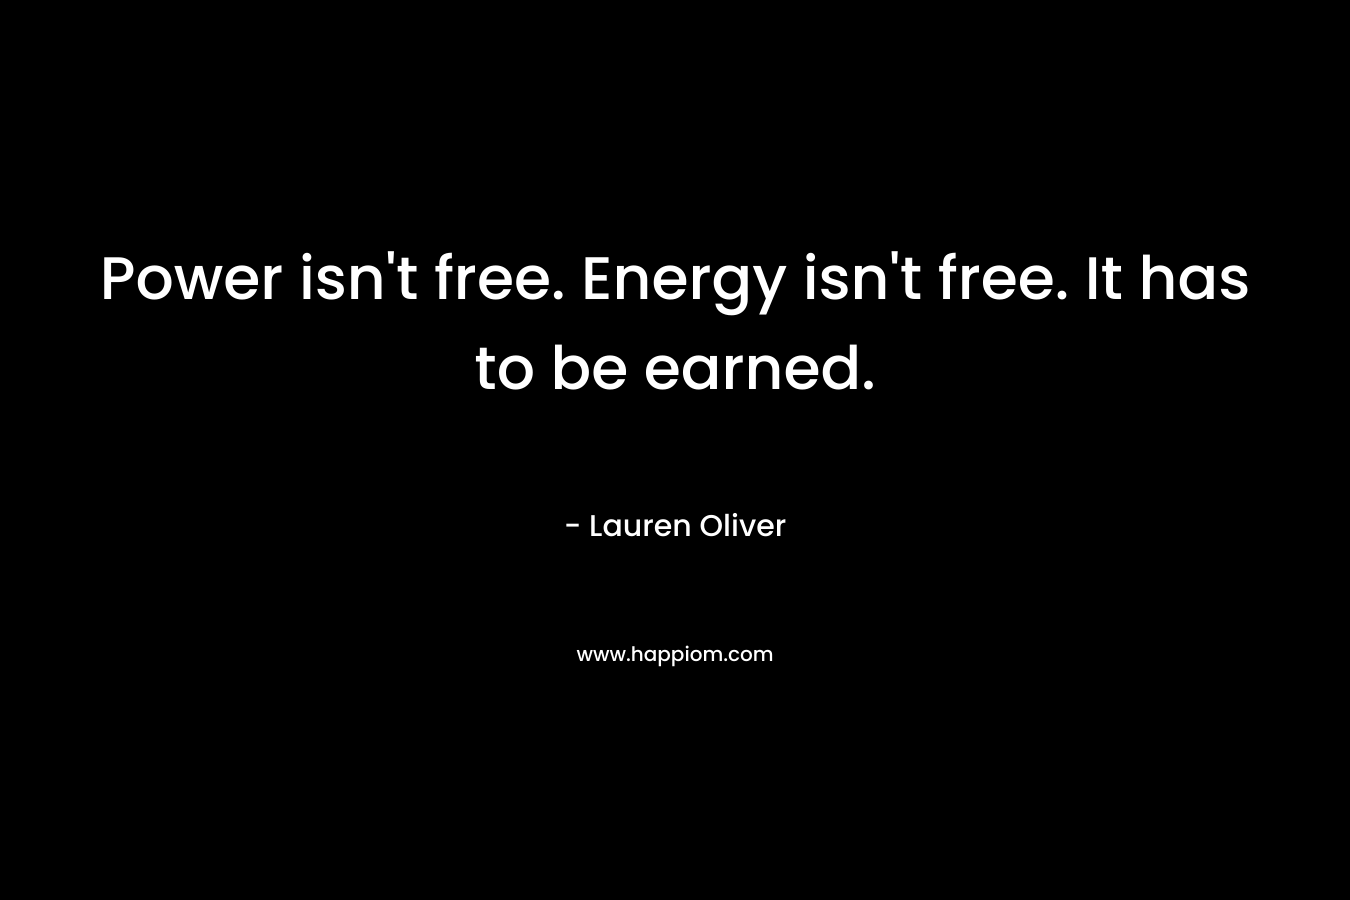 Power isn’t free. Energy isn’t free. It has to be earned. – Lauren Oliver